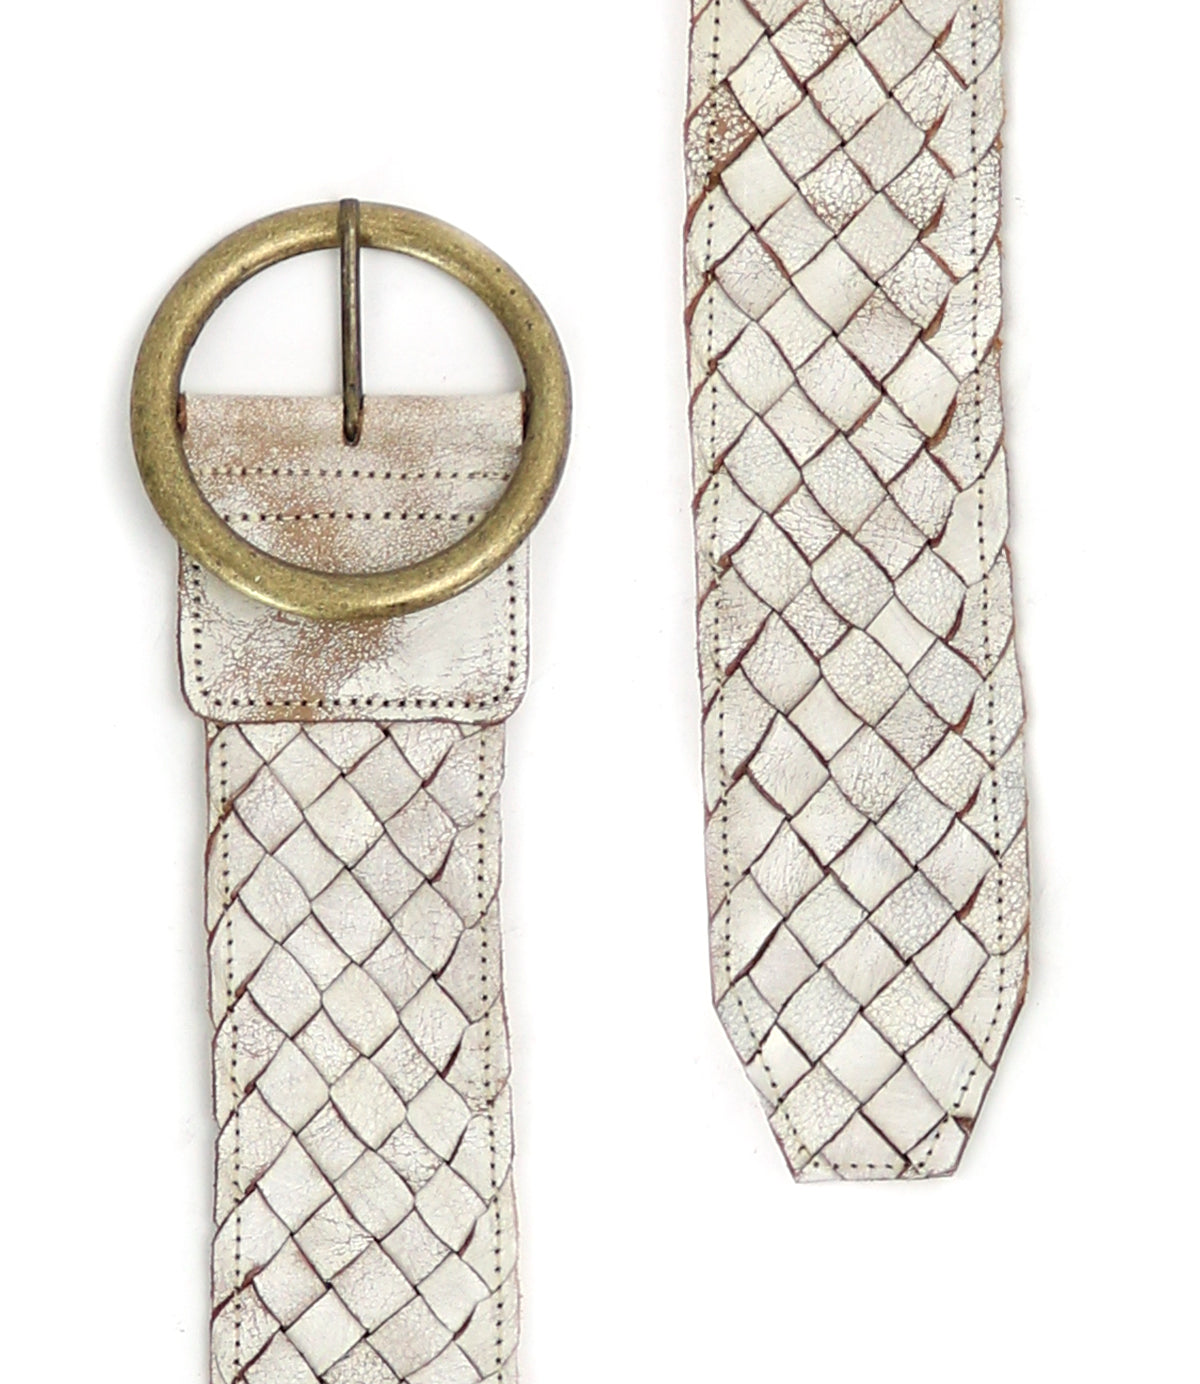 This Dreamweaver belt by Bed Stu combines a classic white leather design with a sleek brass buckle.